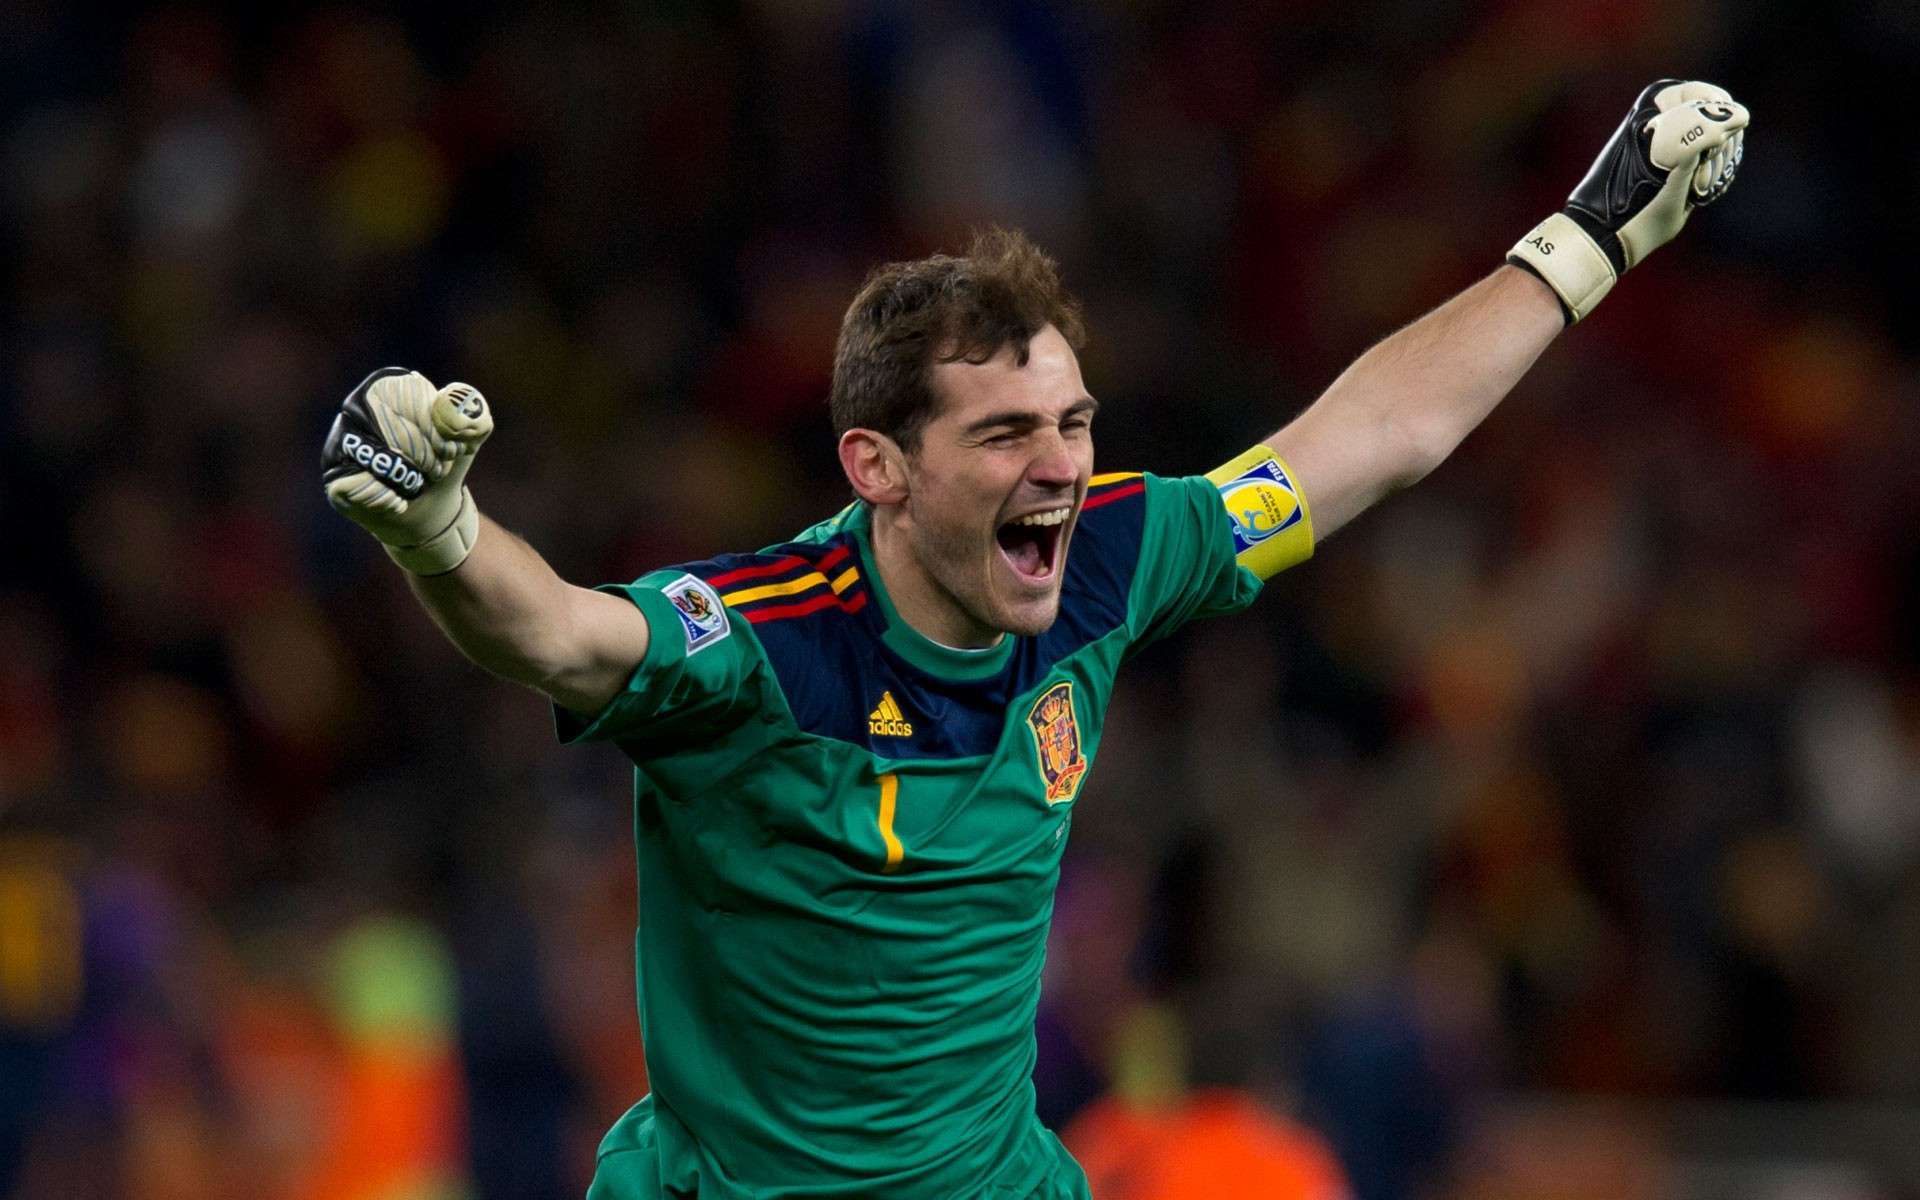 Iker Casillas Wallpaper And Theme For Windows Xp 7 8.1 10. All